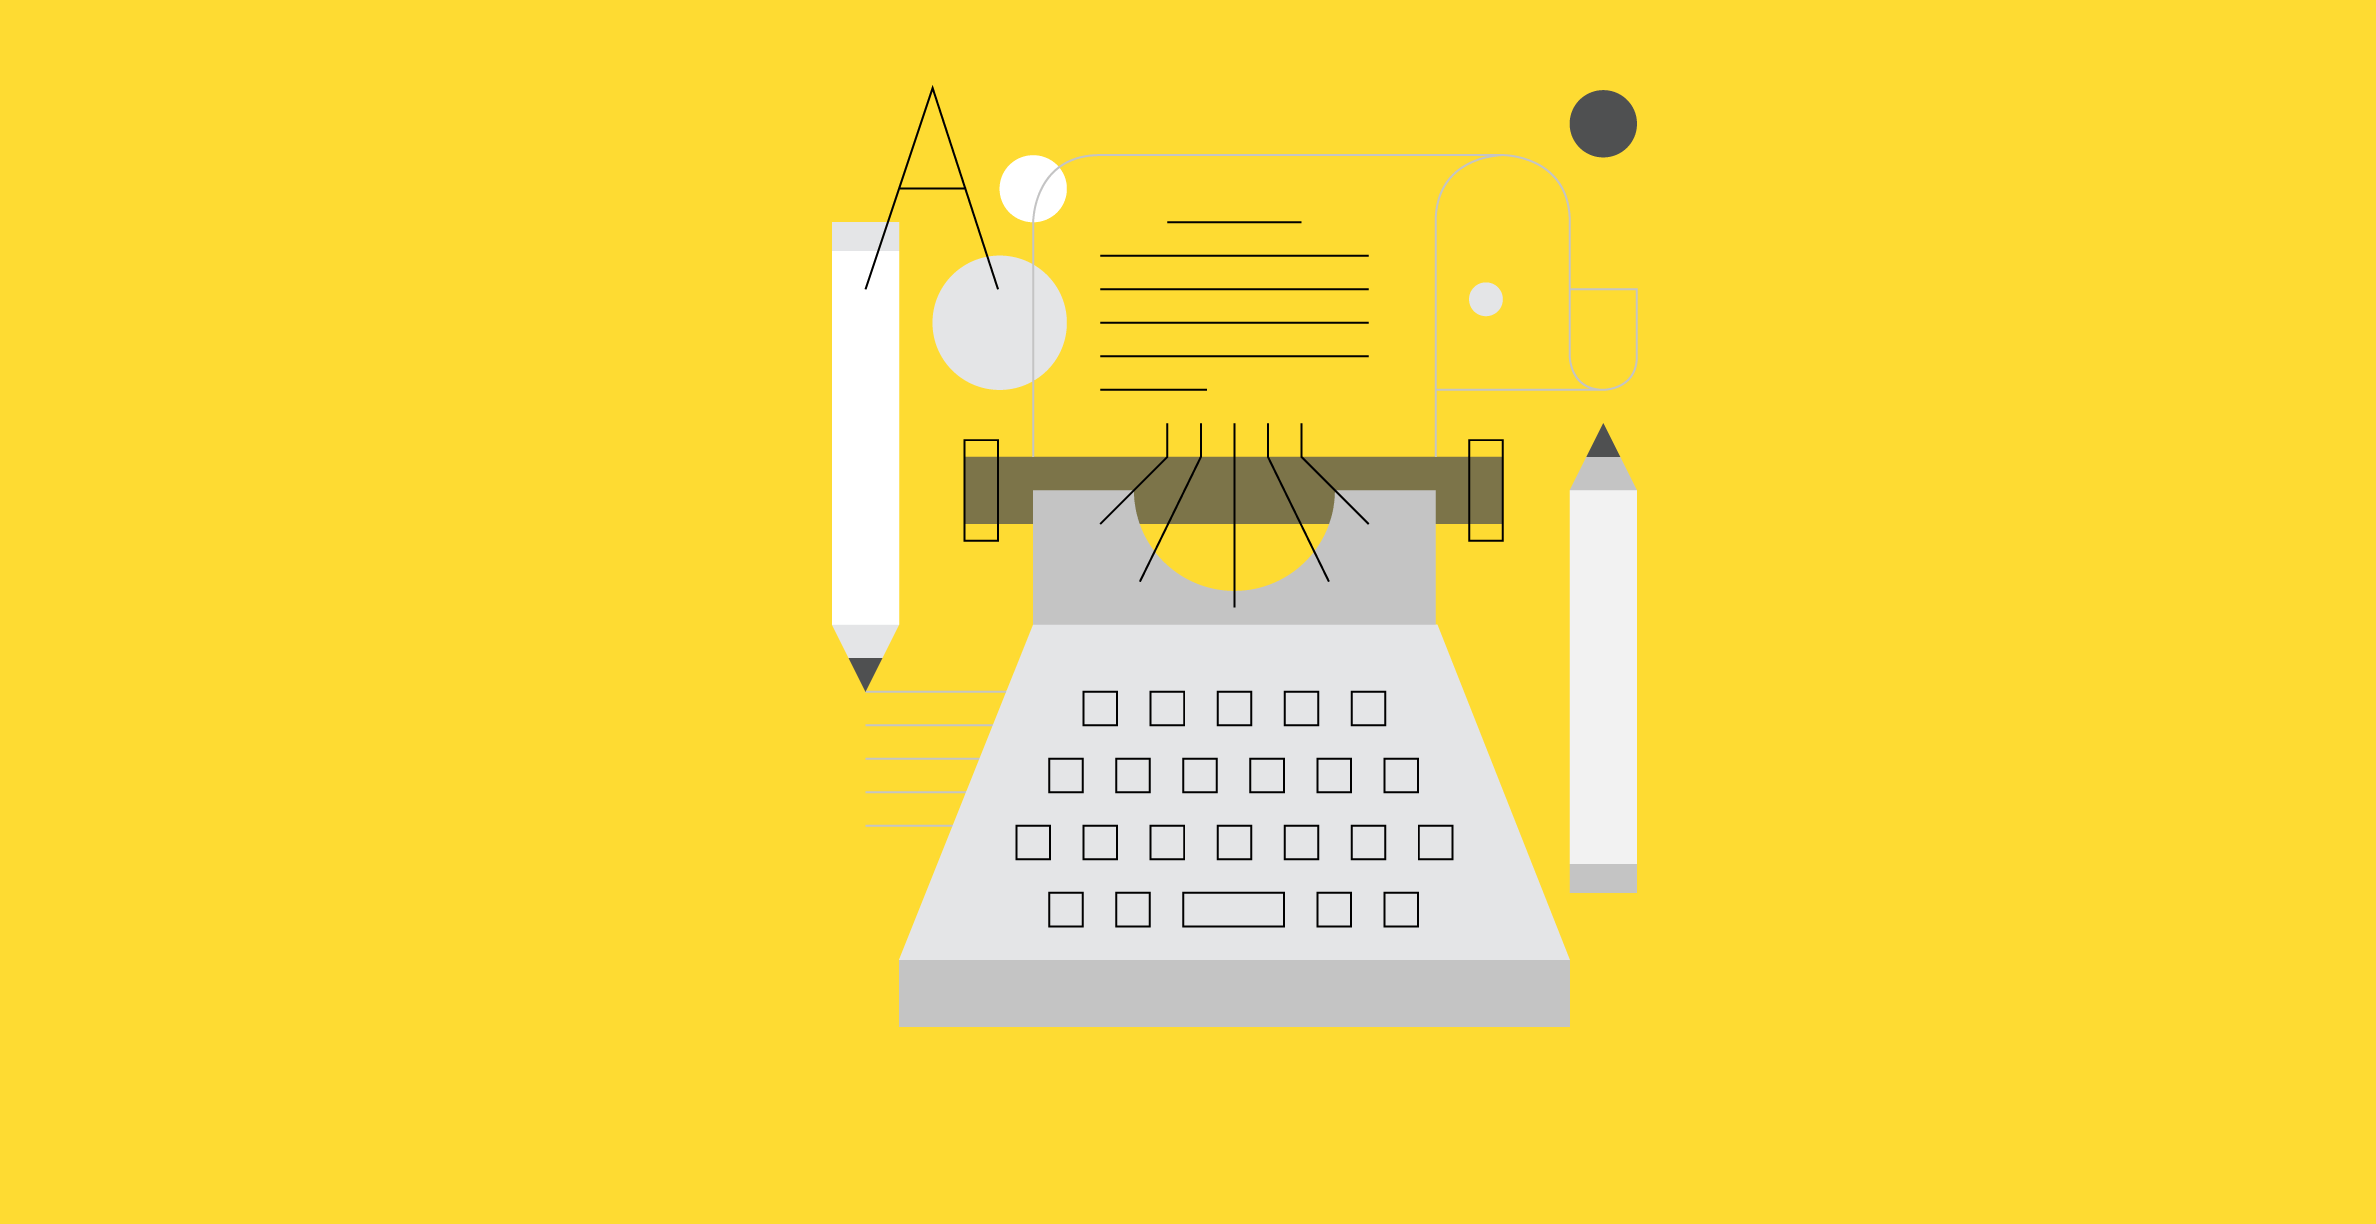 Illustration of a blog using a typewriter, pen, paper and text